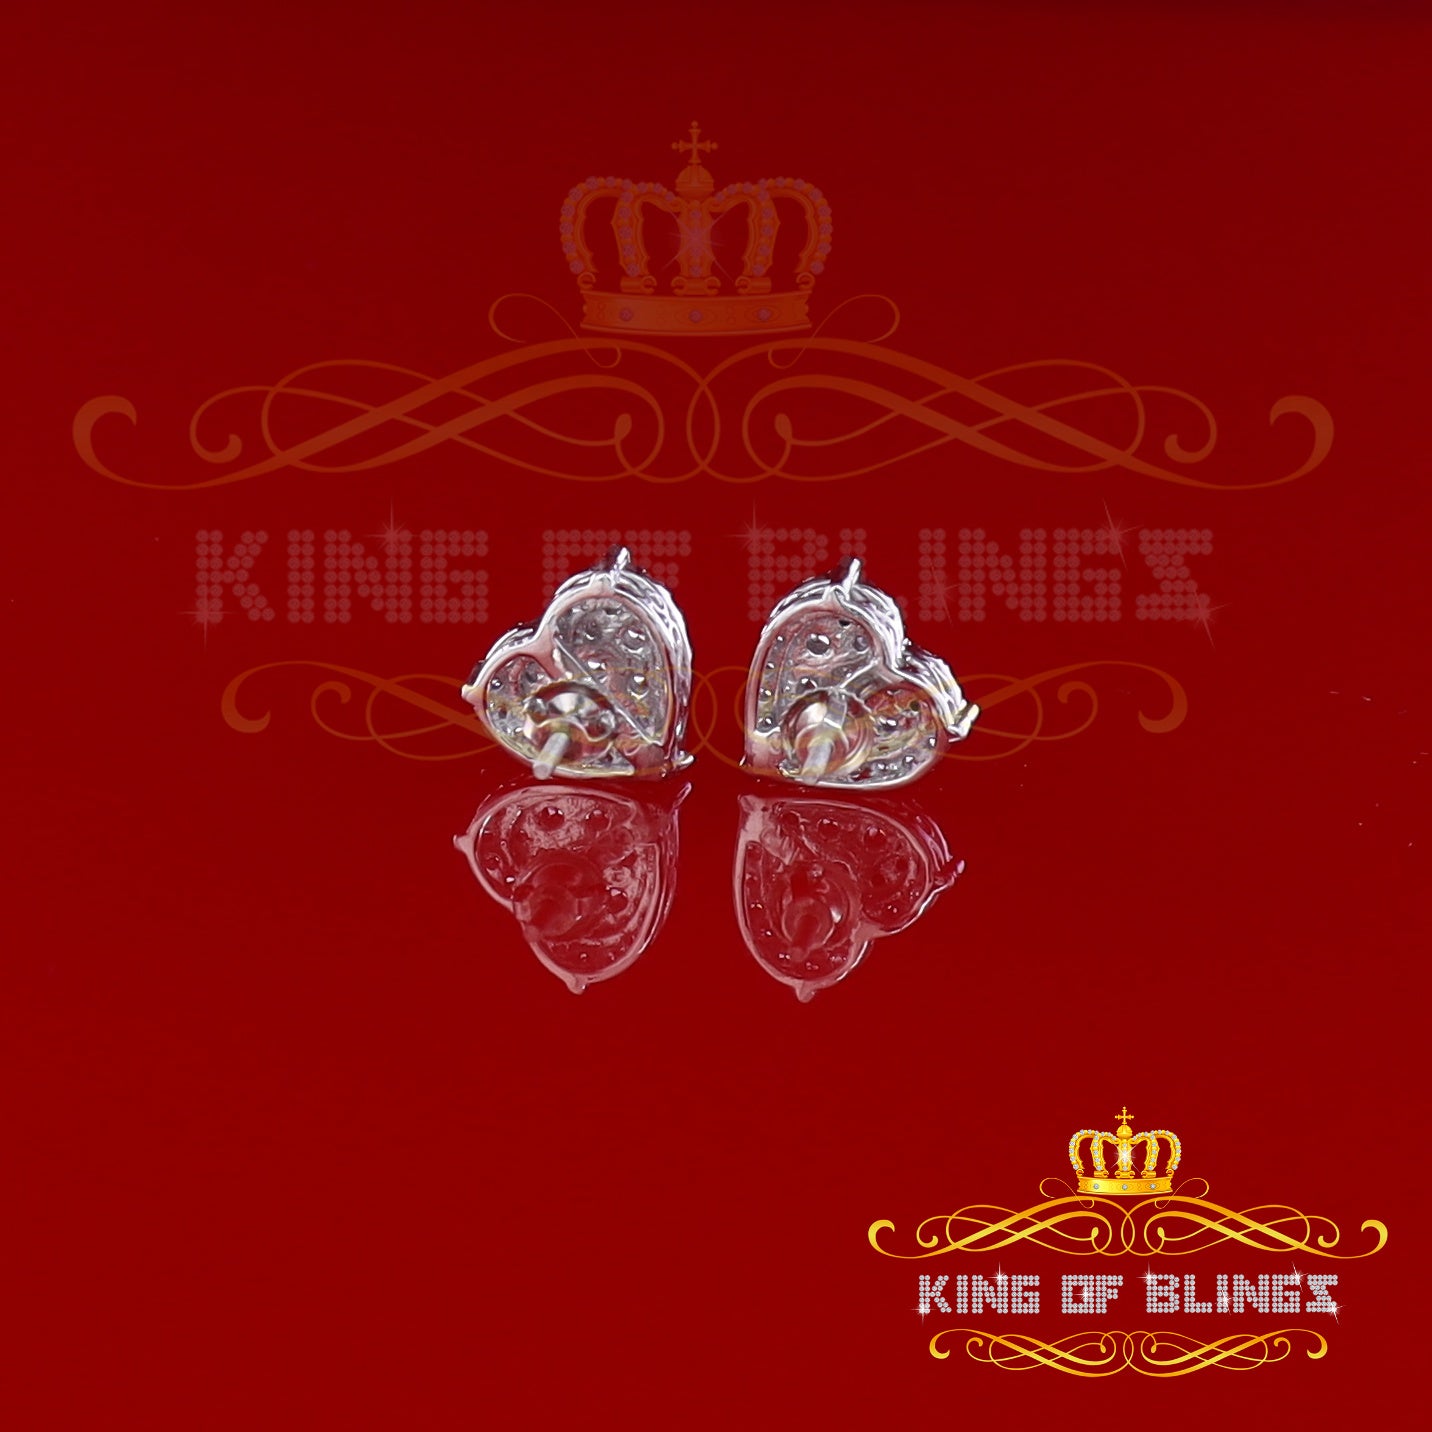 King of Blings- Aretes Para Hombre 925 White Silver 1.64ct Cubic Zirconia Heart Women's Earrings KING OF BLINGS